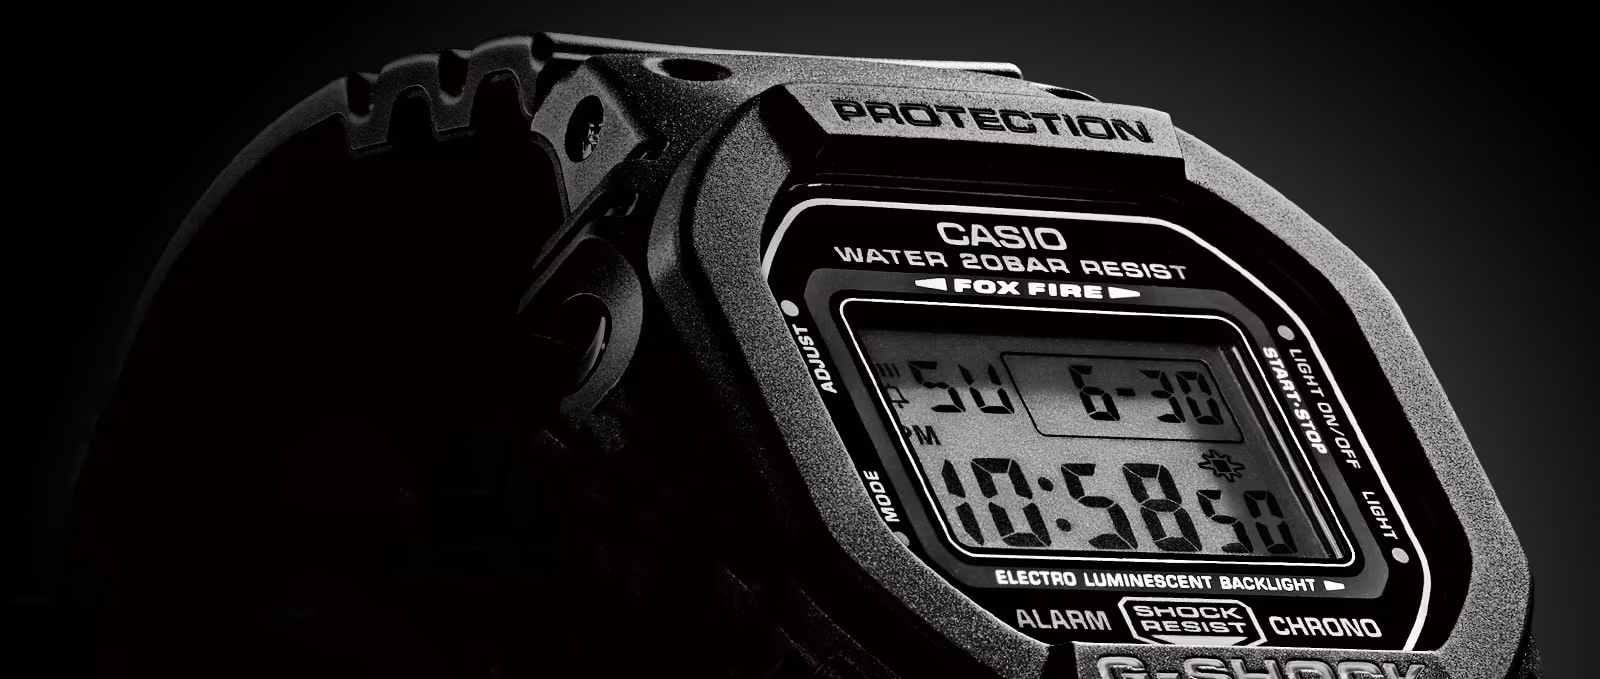 G-SHOCK Absolute Toughness 